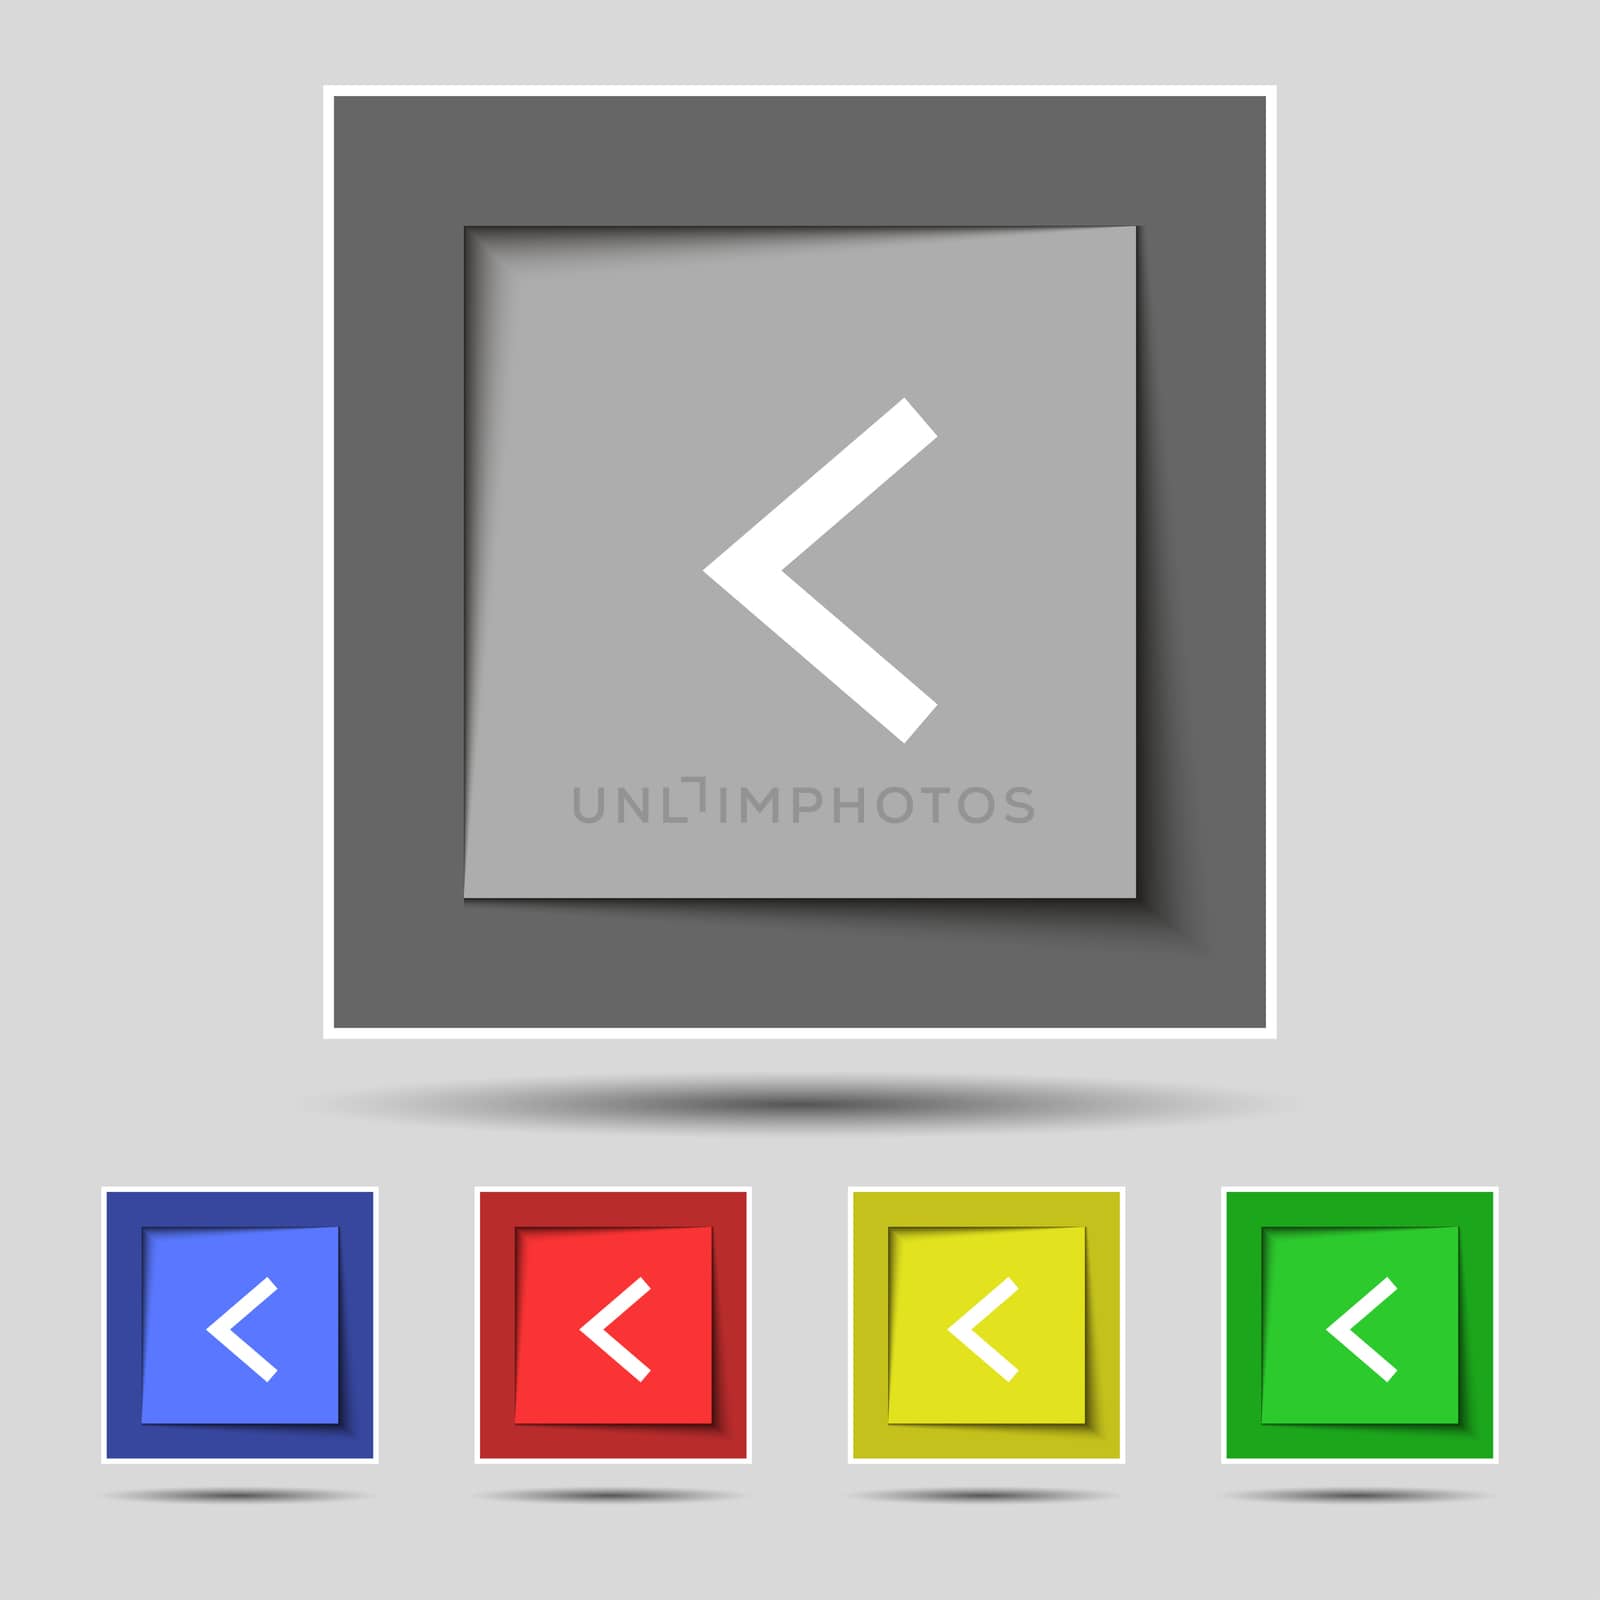 Arrow left, Way out icon sign on the original five colored buttons. illustration